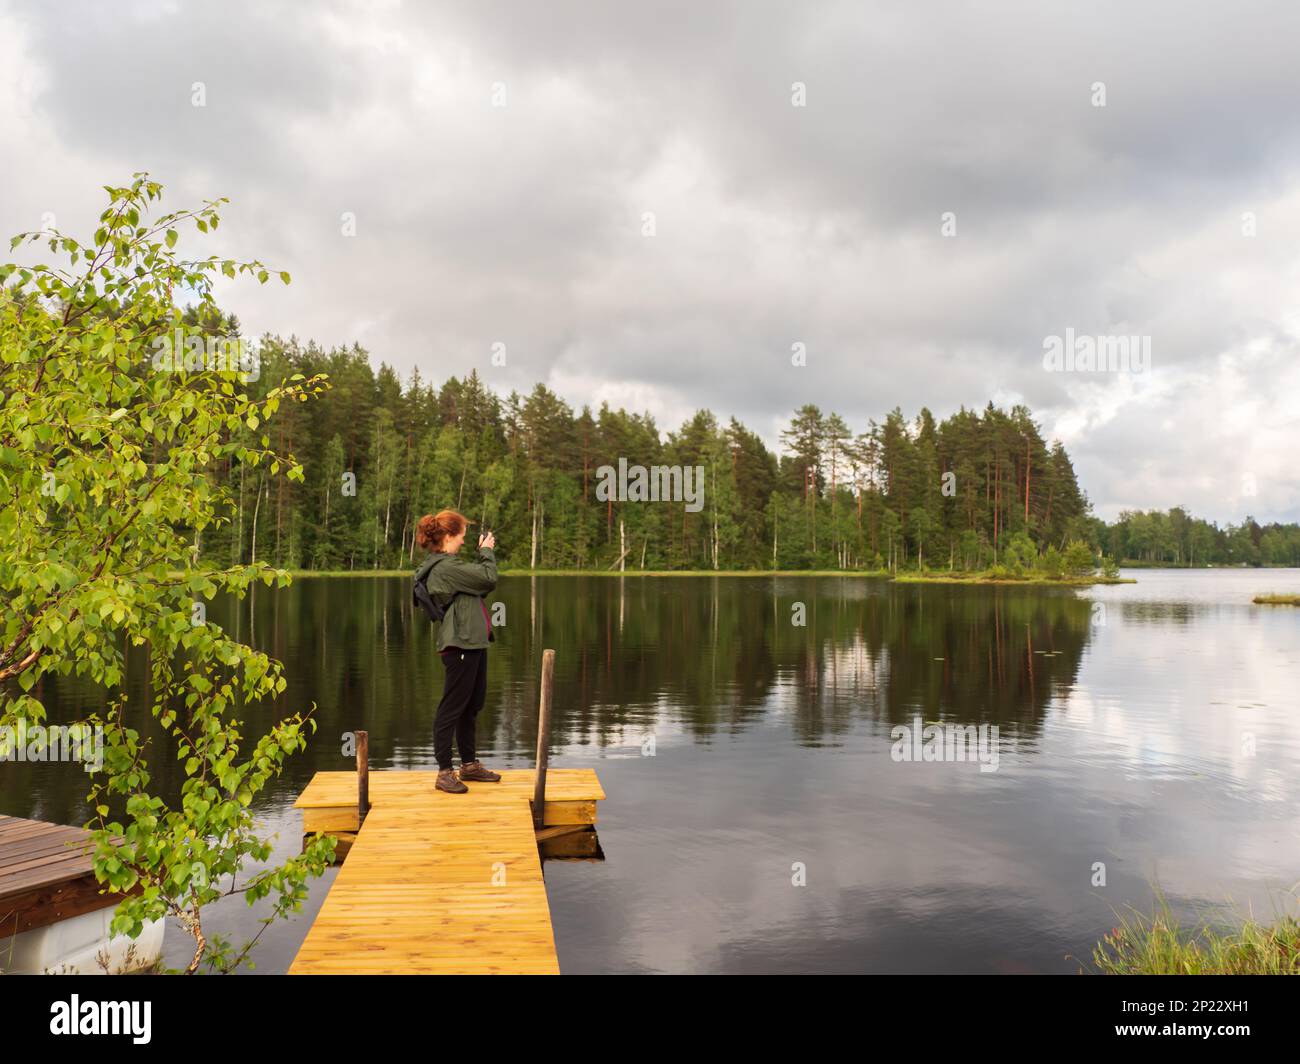 Axland, Sweden - June, 2021: A tourist on the Swedish trails. North Europe Stock Photo